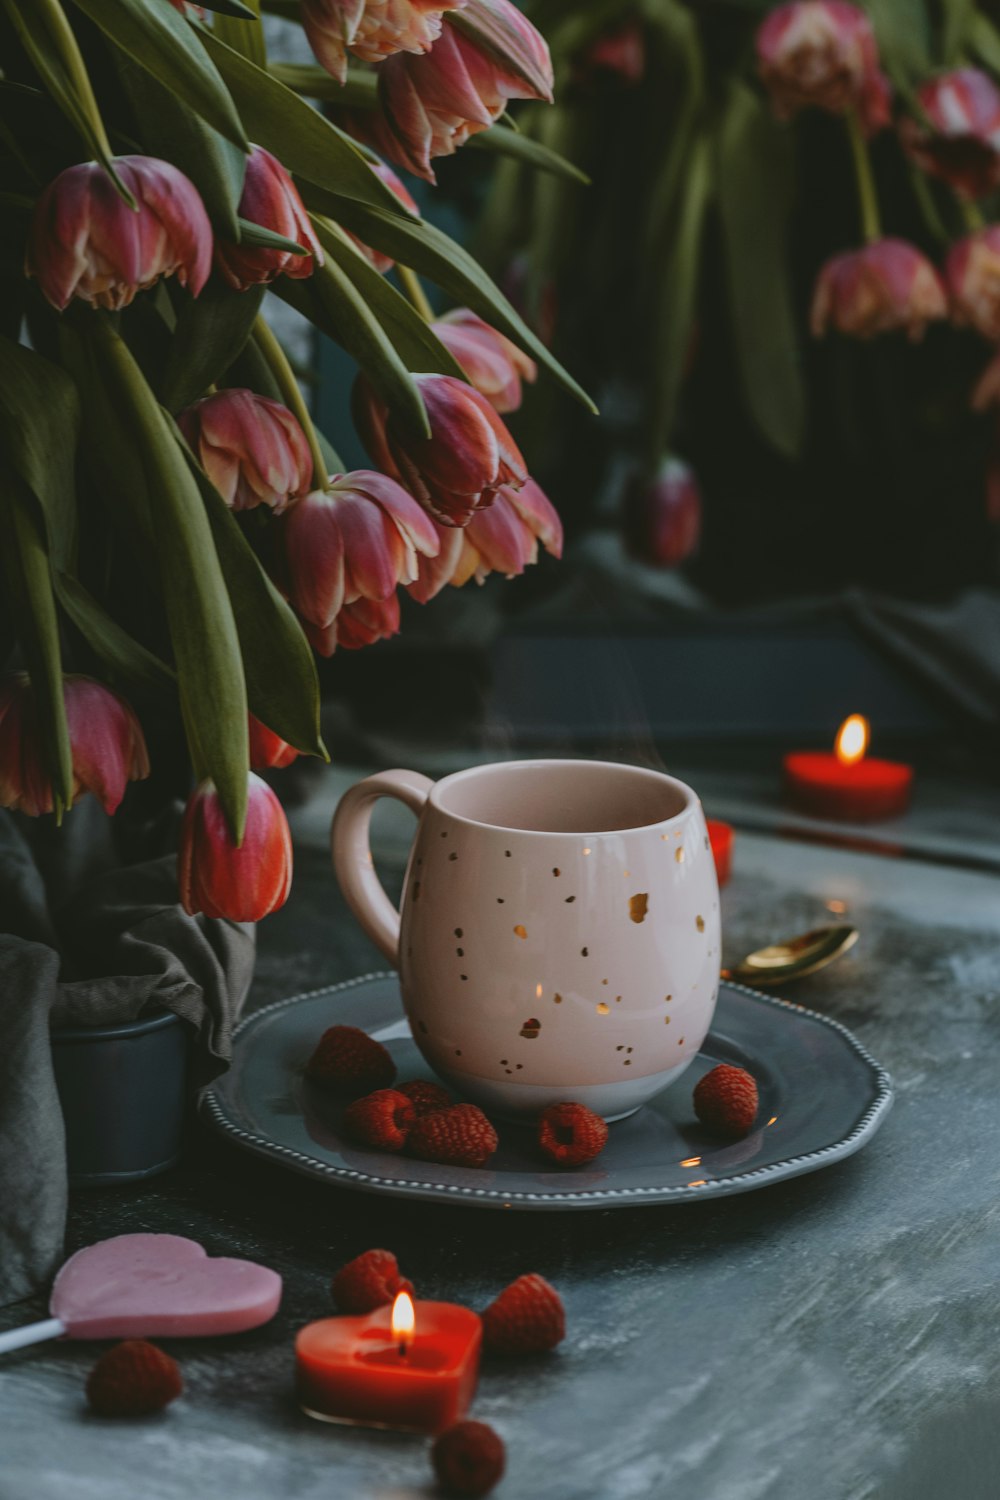 a cup of coffee on a plate next to some flowers